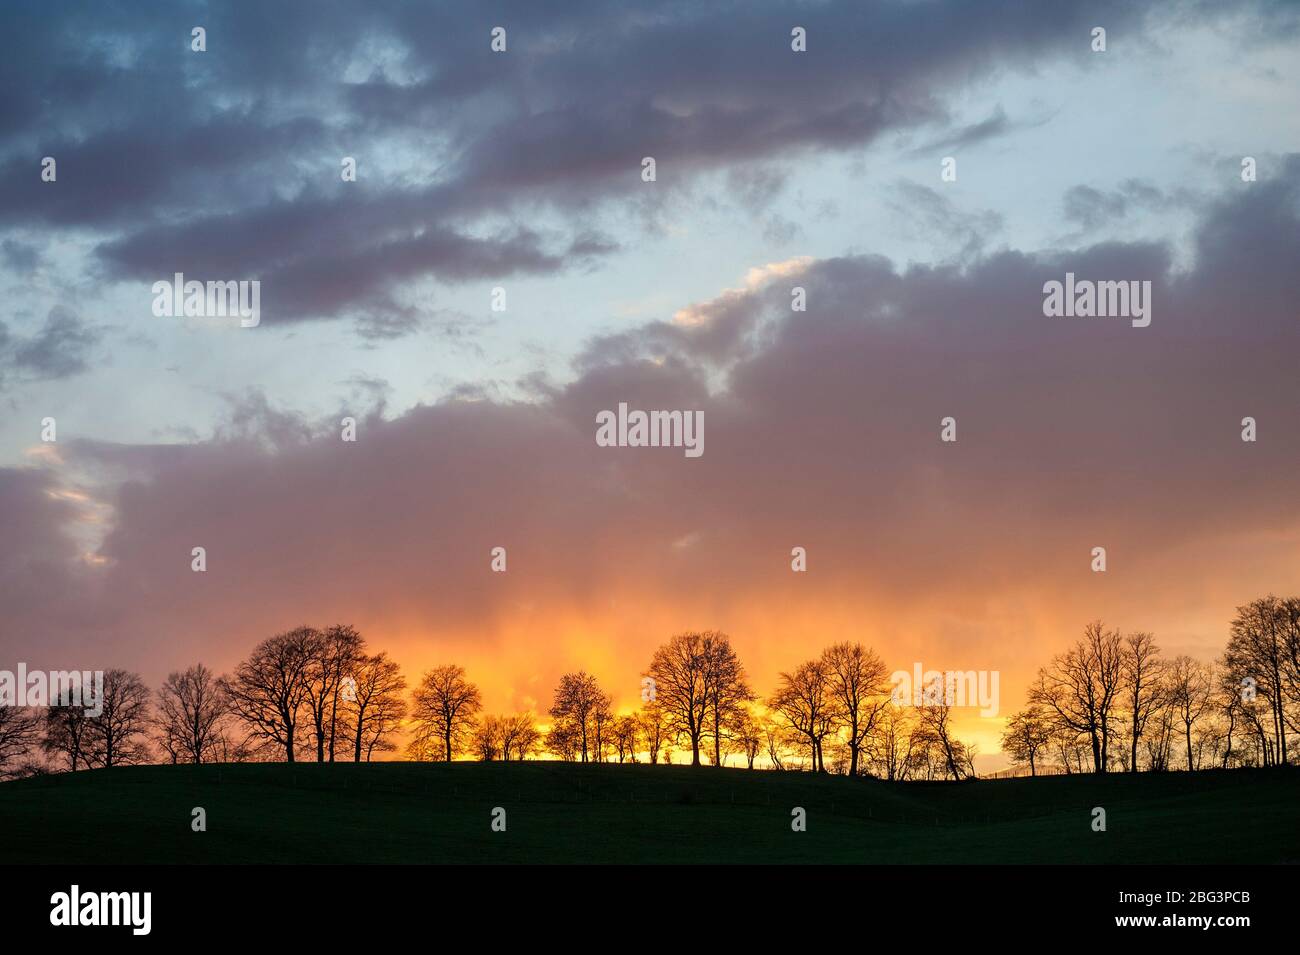 Bavarian Landscape with Line of Trees Stock Photo